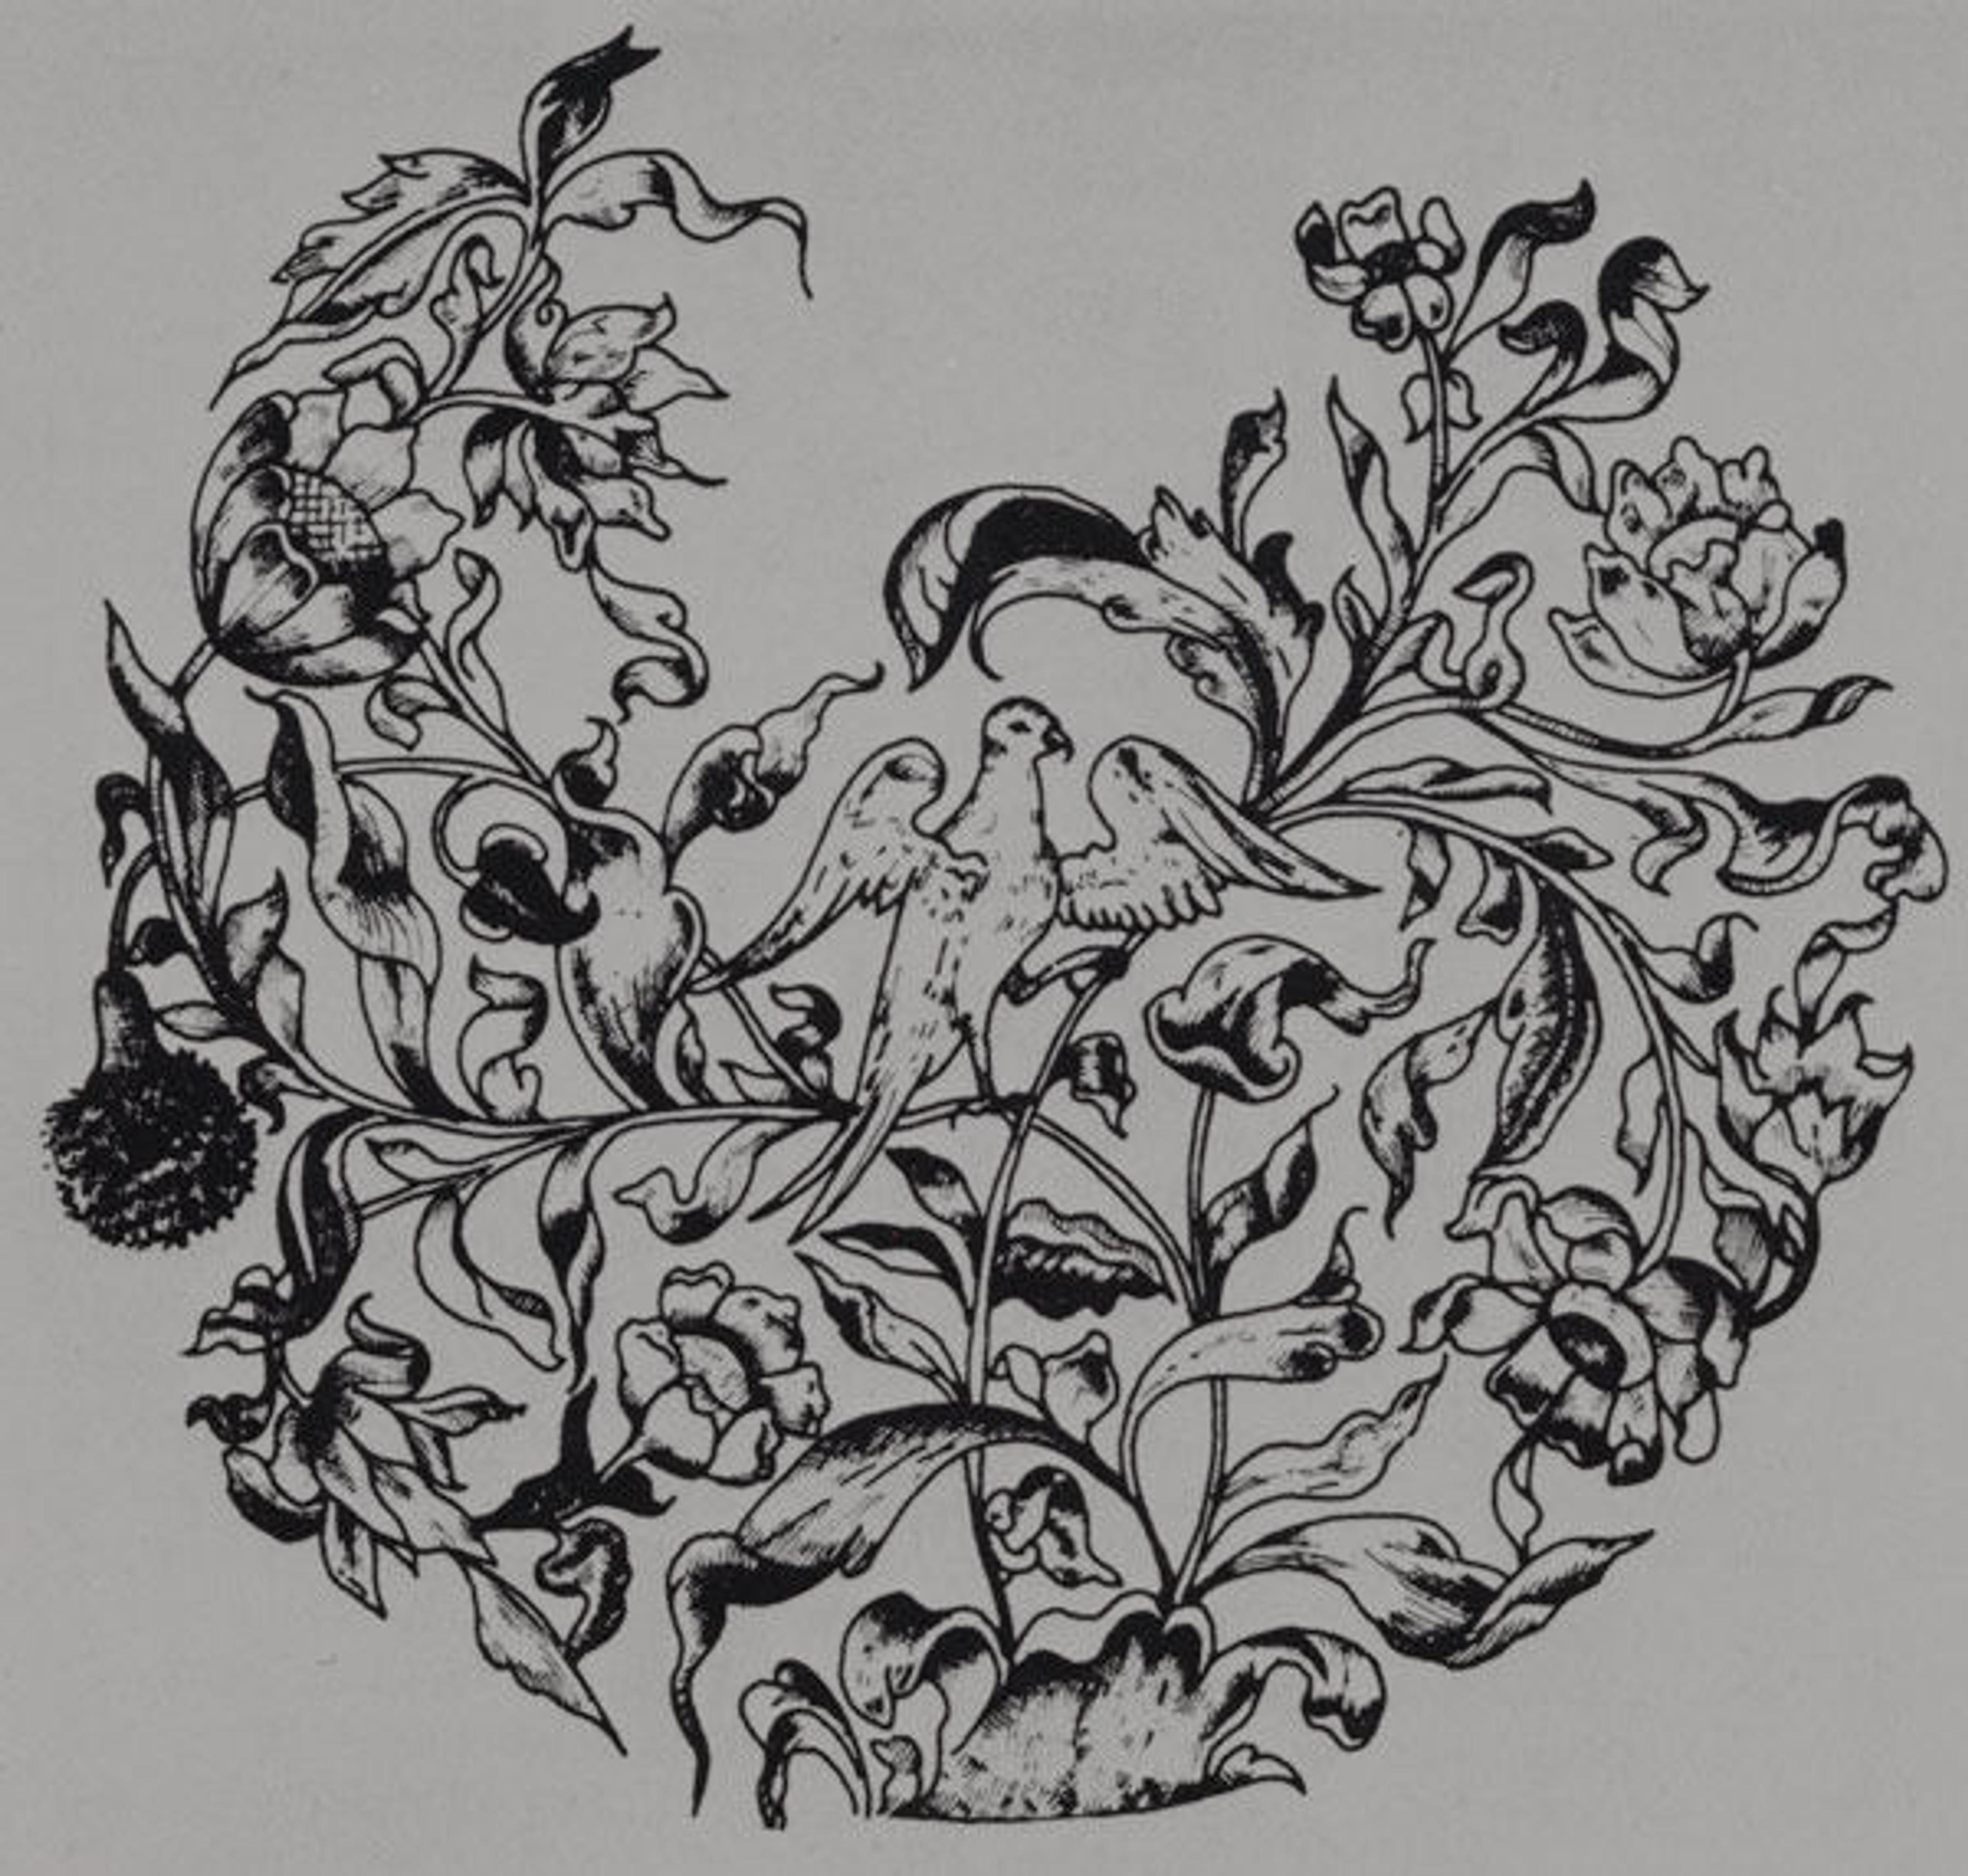 Andreas Tar (Hungarian, active 1677–1683). Floral Arrangement with Birds, ca. 1680. Design drawing. Museum of the City, Kolozsvár